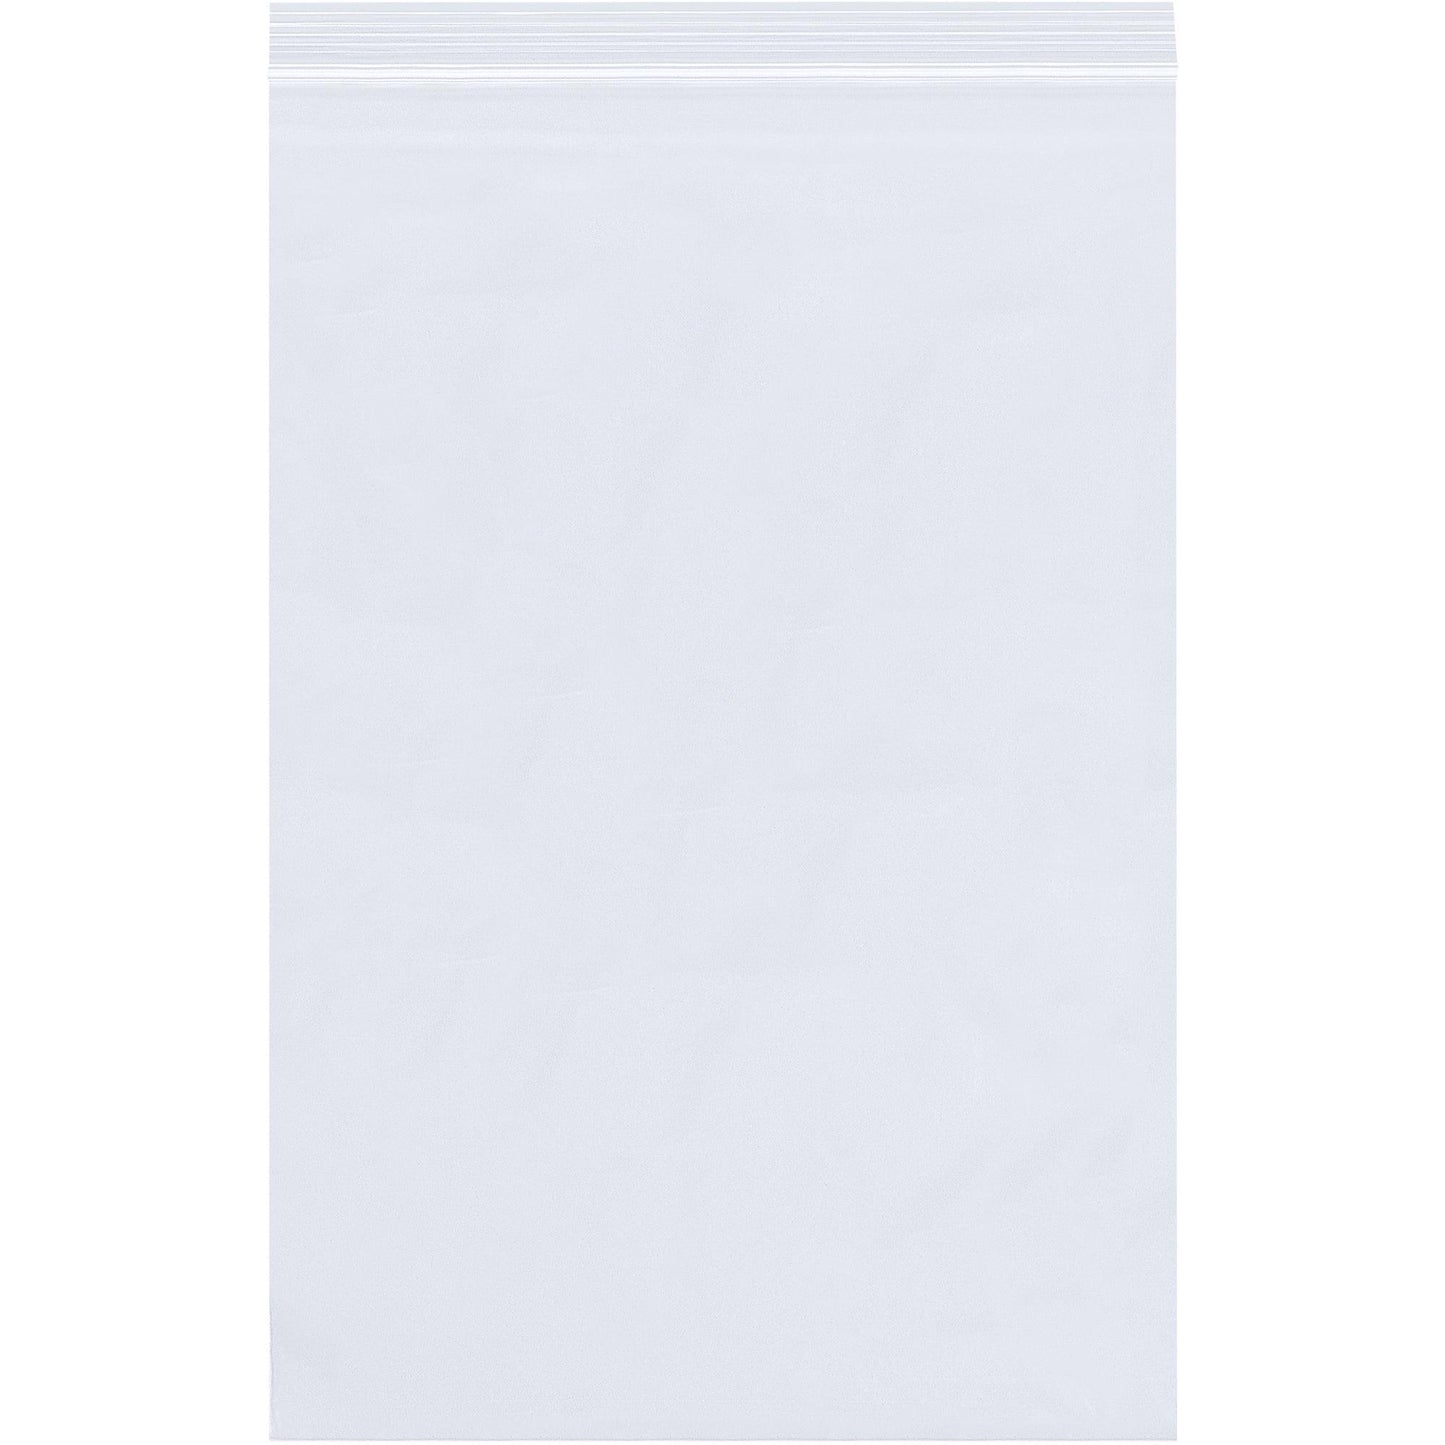 18 x 24" - 8 Mil Reclosable Poly Bags - PB3925